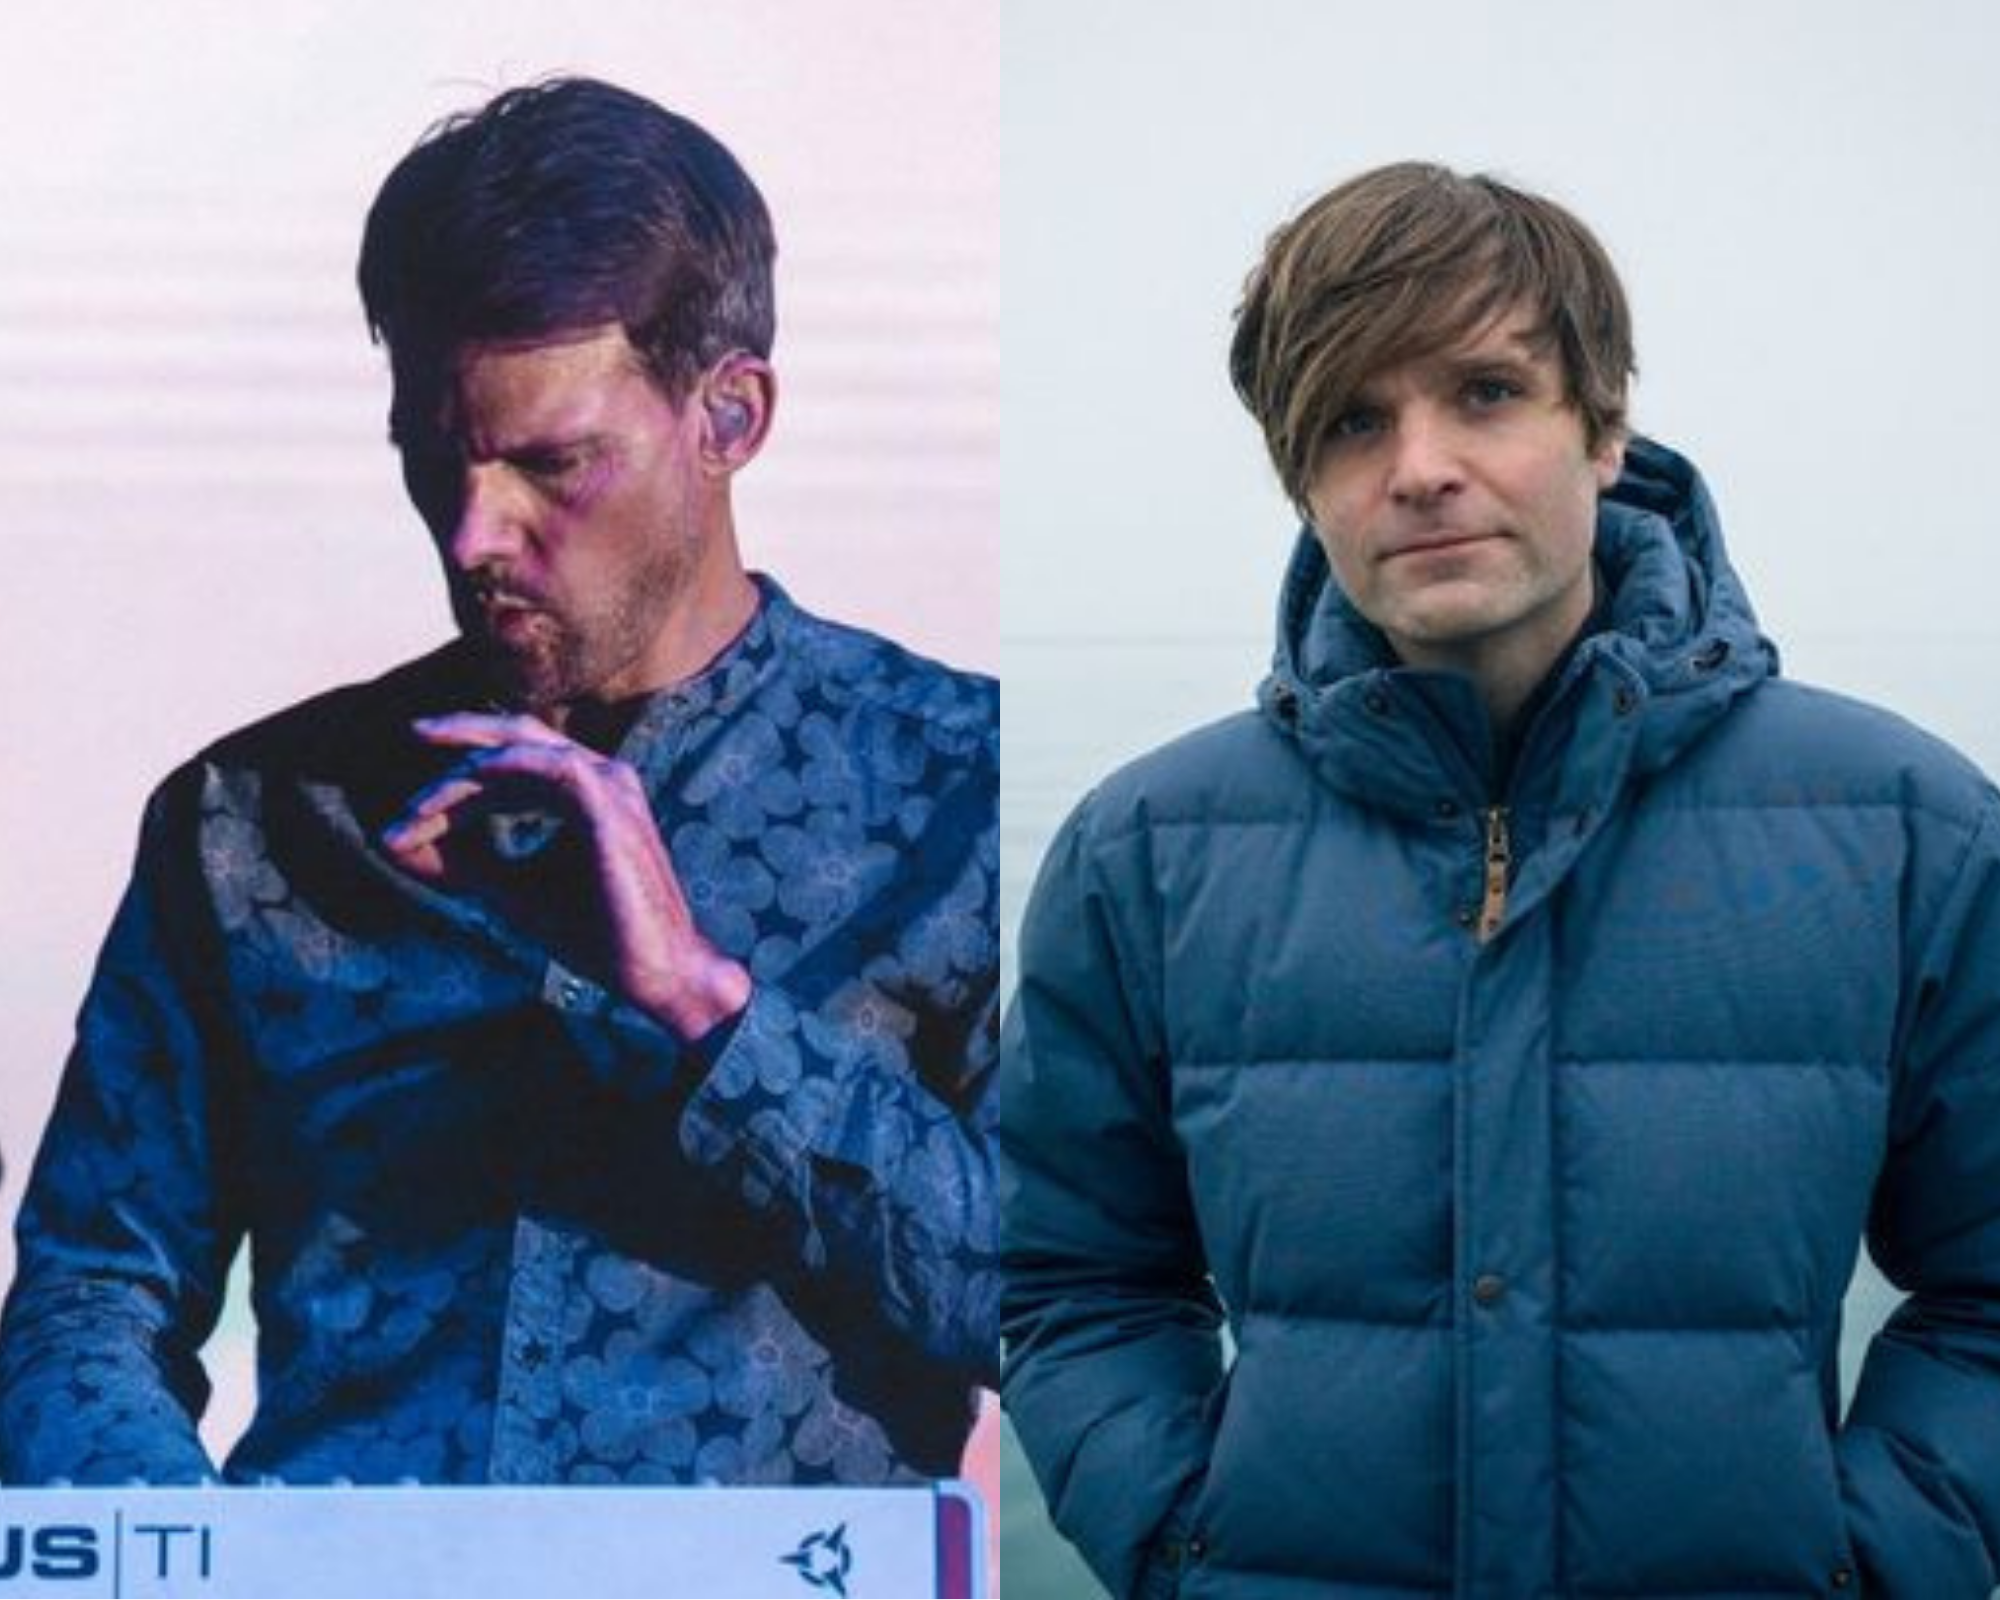 Track of The Week: Tycho and Benjamin Gibbard's "Only Love" has a Powerful Message